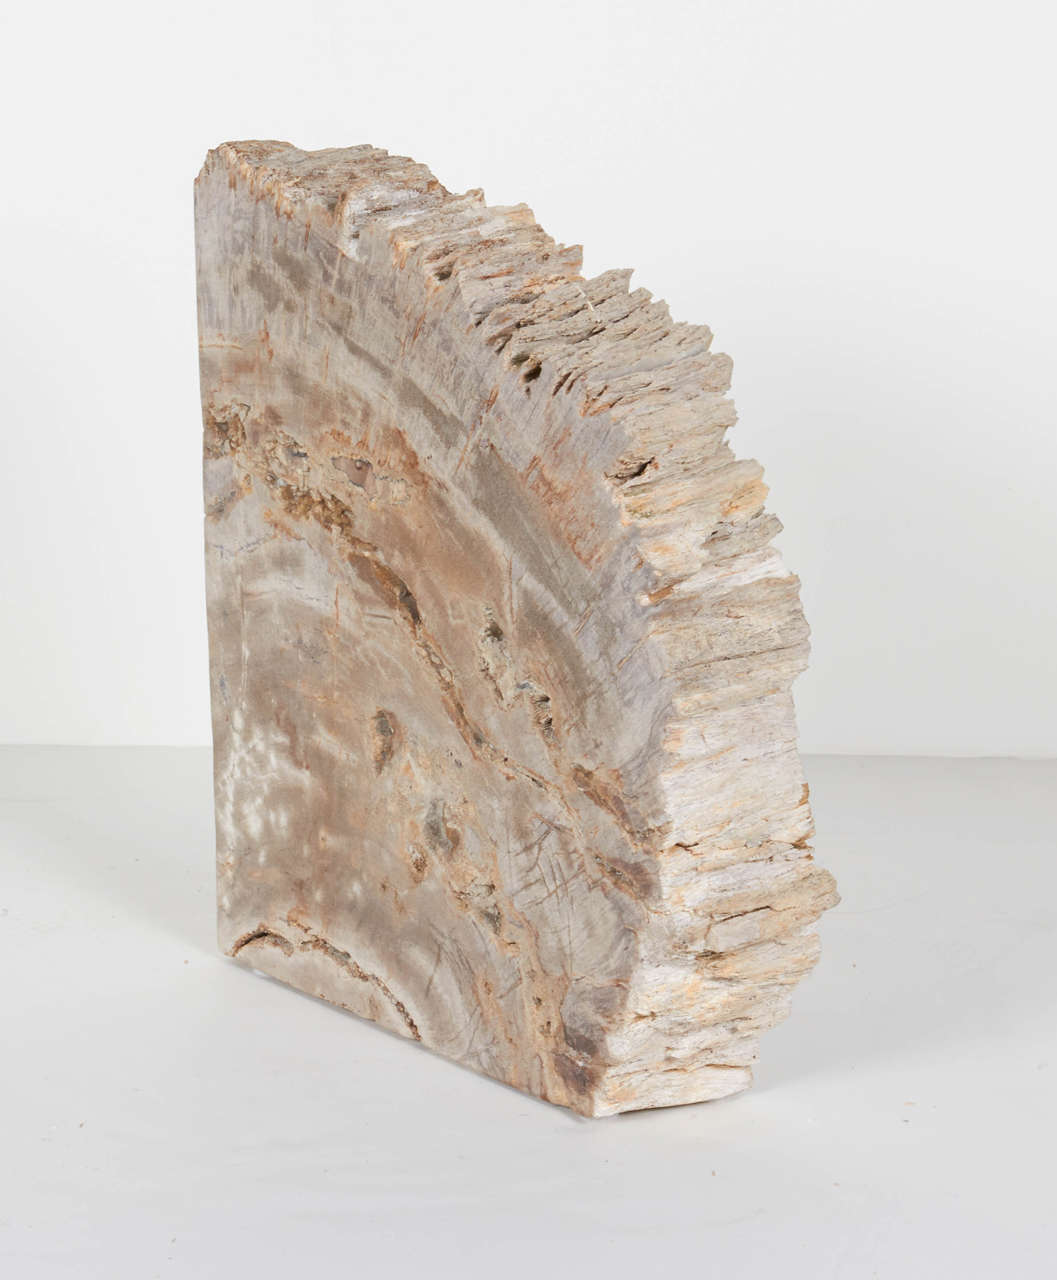 Polished Pair of Remarkable Petrified Wood Bookends with Natural Jagged Edges